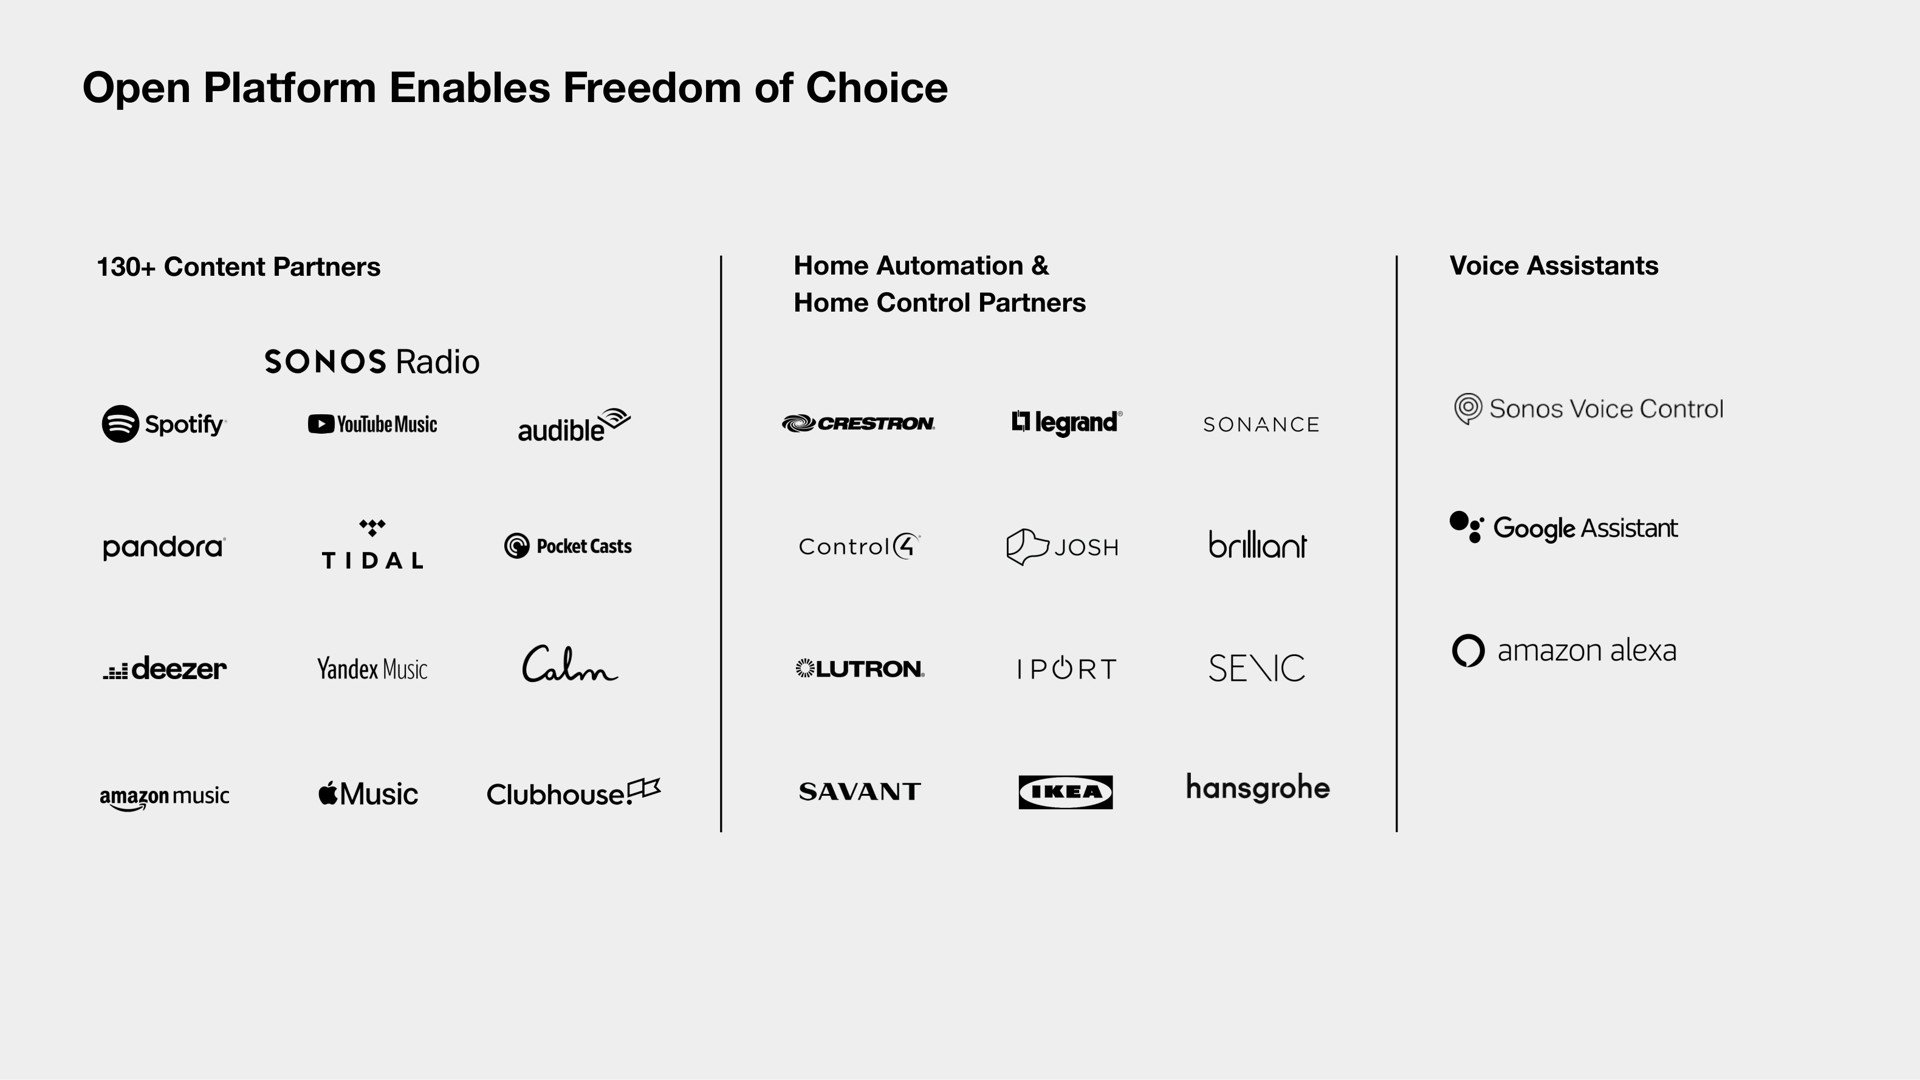 open platform enables freedom of choice | Sonos